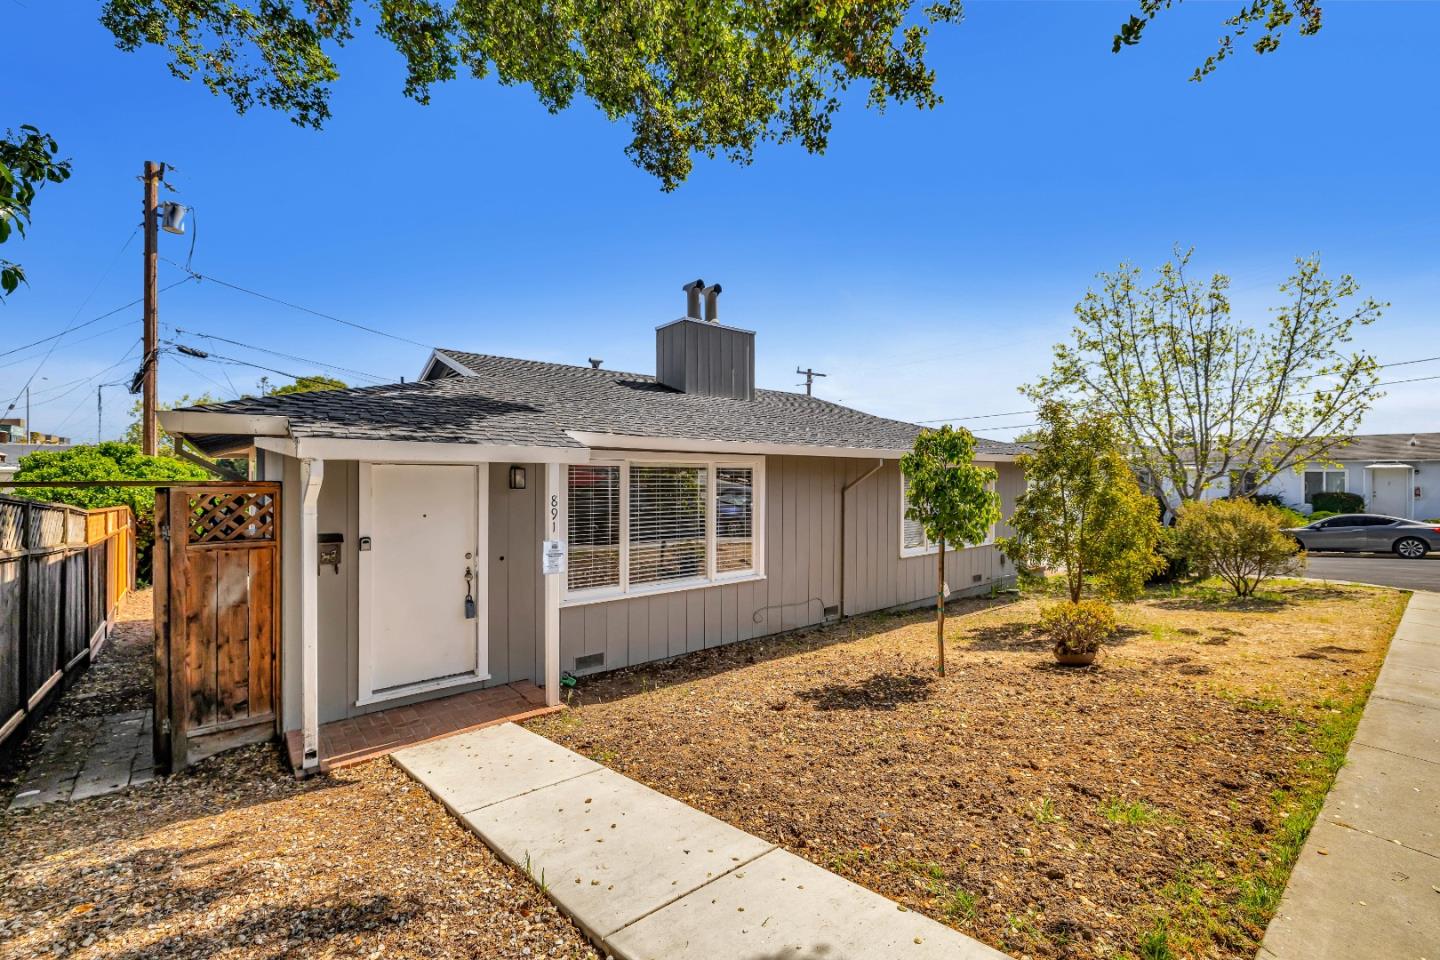 Photo of 820 Hill/891 Gordon Ave St in Belmont, CA